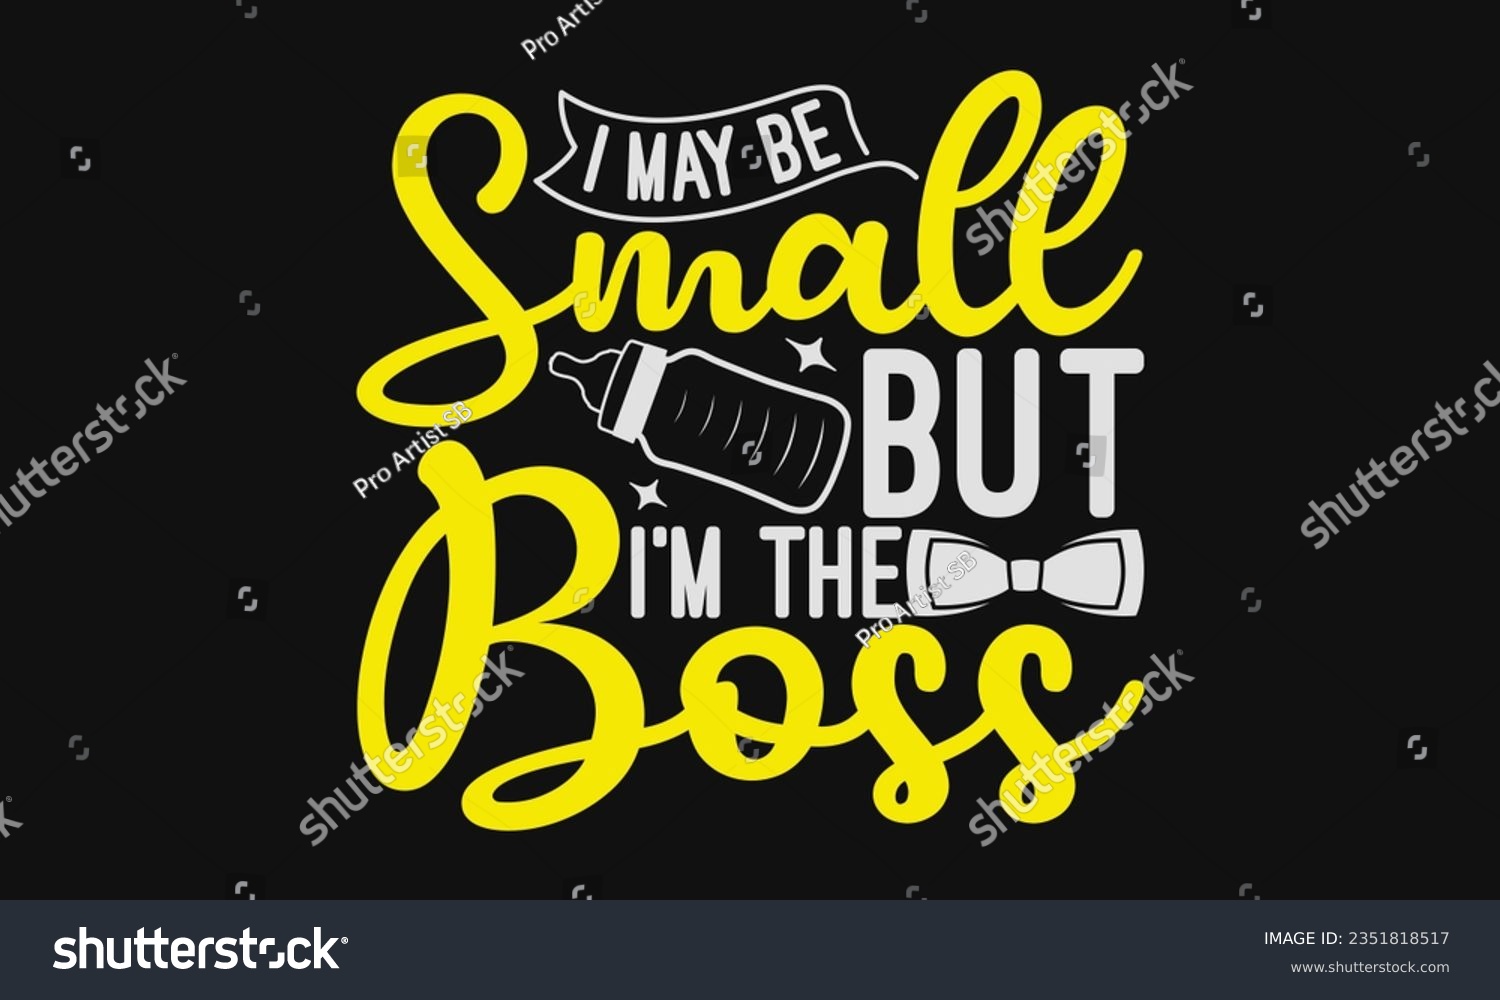 SVG of I may be small but I’m the boss - Baby SVG Design Sublimation, New Born Baby Quotes, Calligraphy Graphic Design, Typography Poster with Old Style Camera and Quote. svg